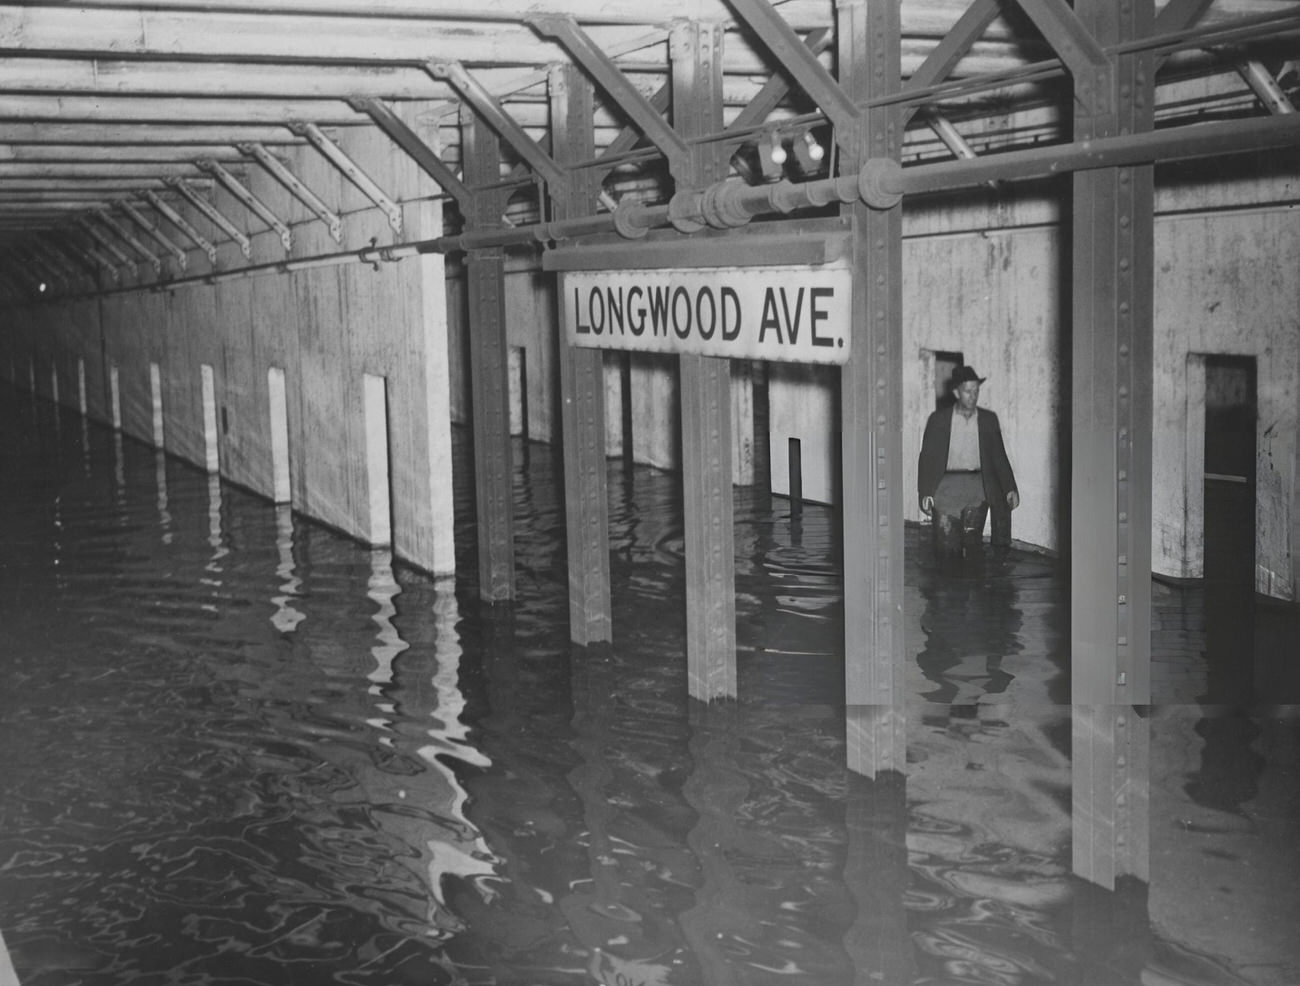 Flooded Subway Tracks At Longwood Avenue In The Bronx, 1940.